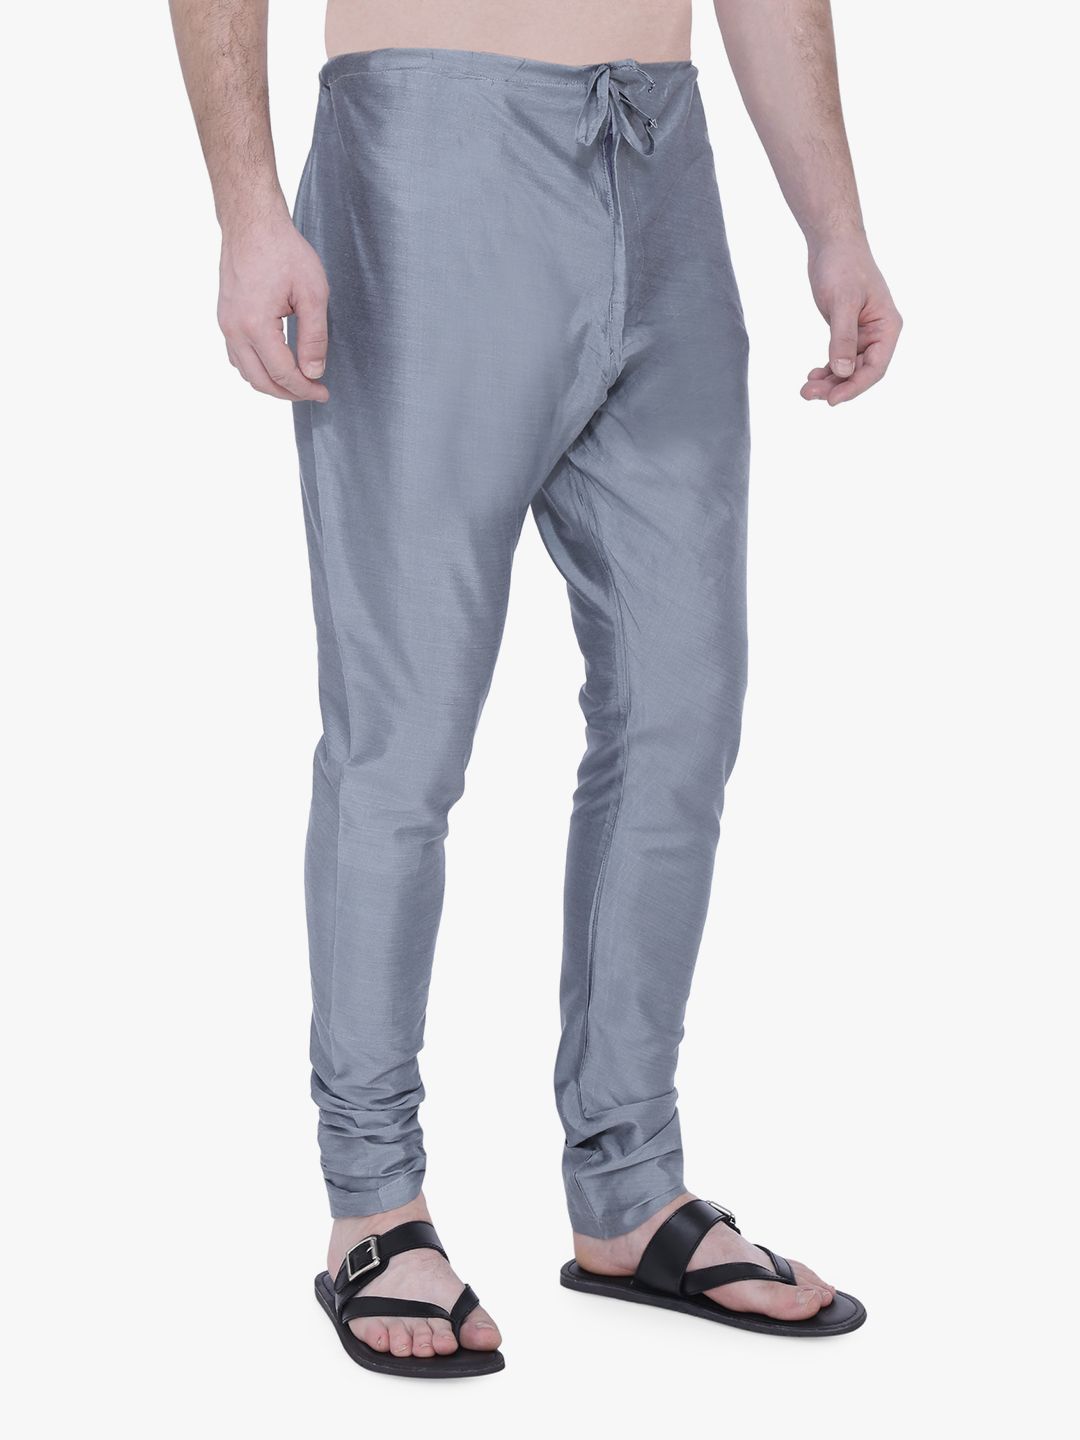 Buy Textured Churidar Pants Online at Best Prices in India - JioMart.